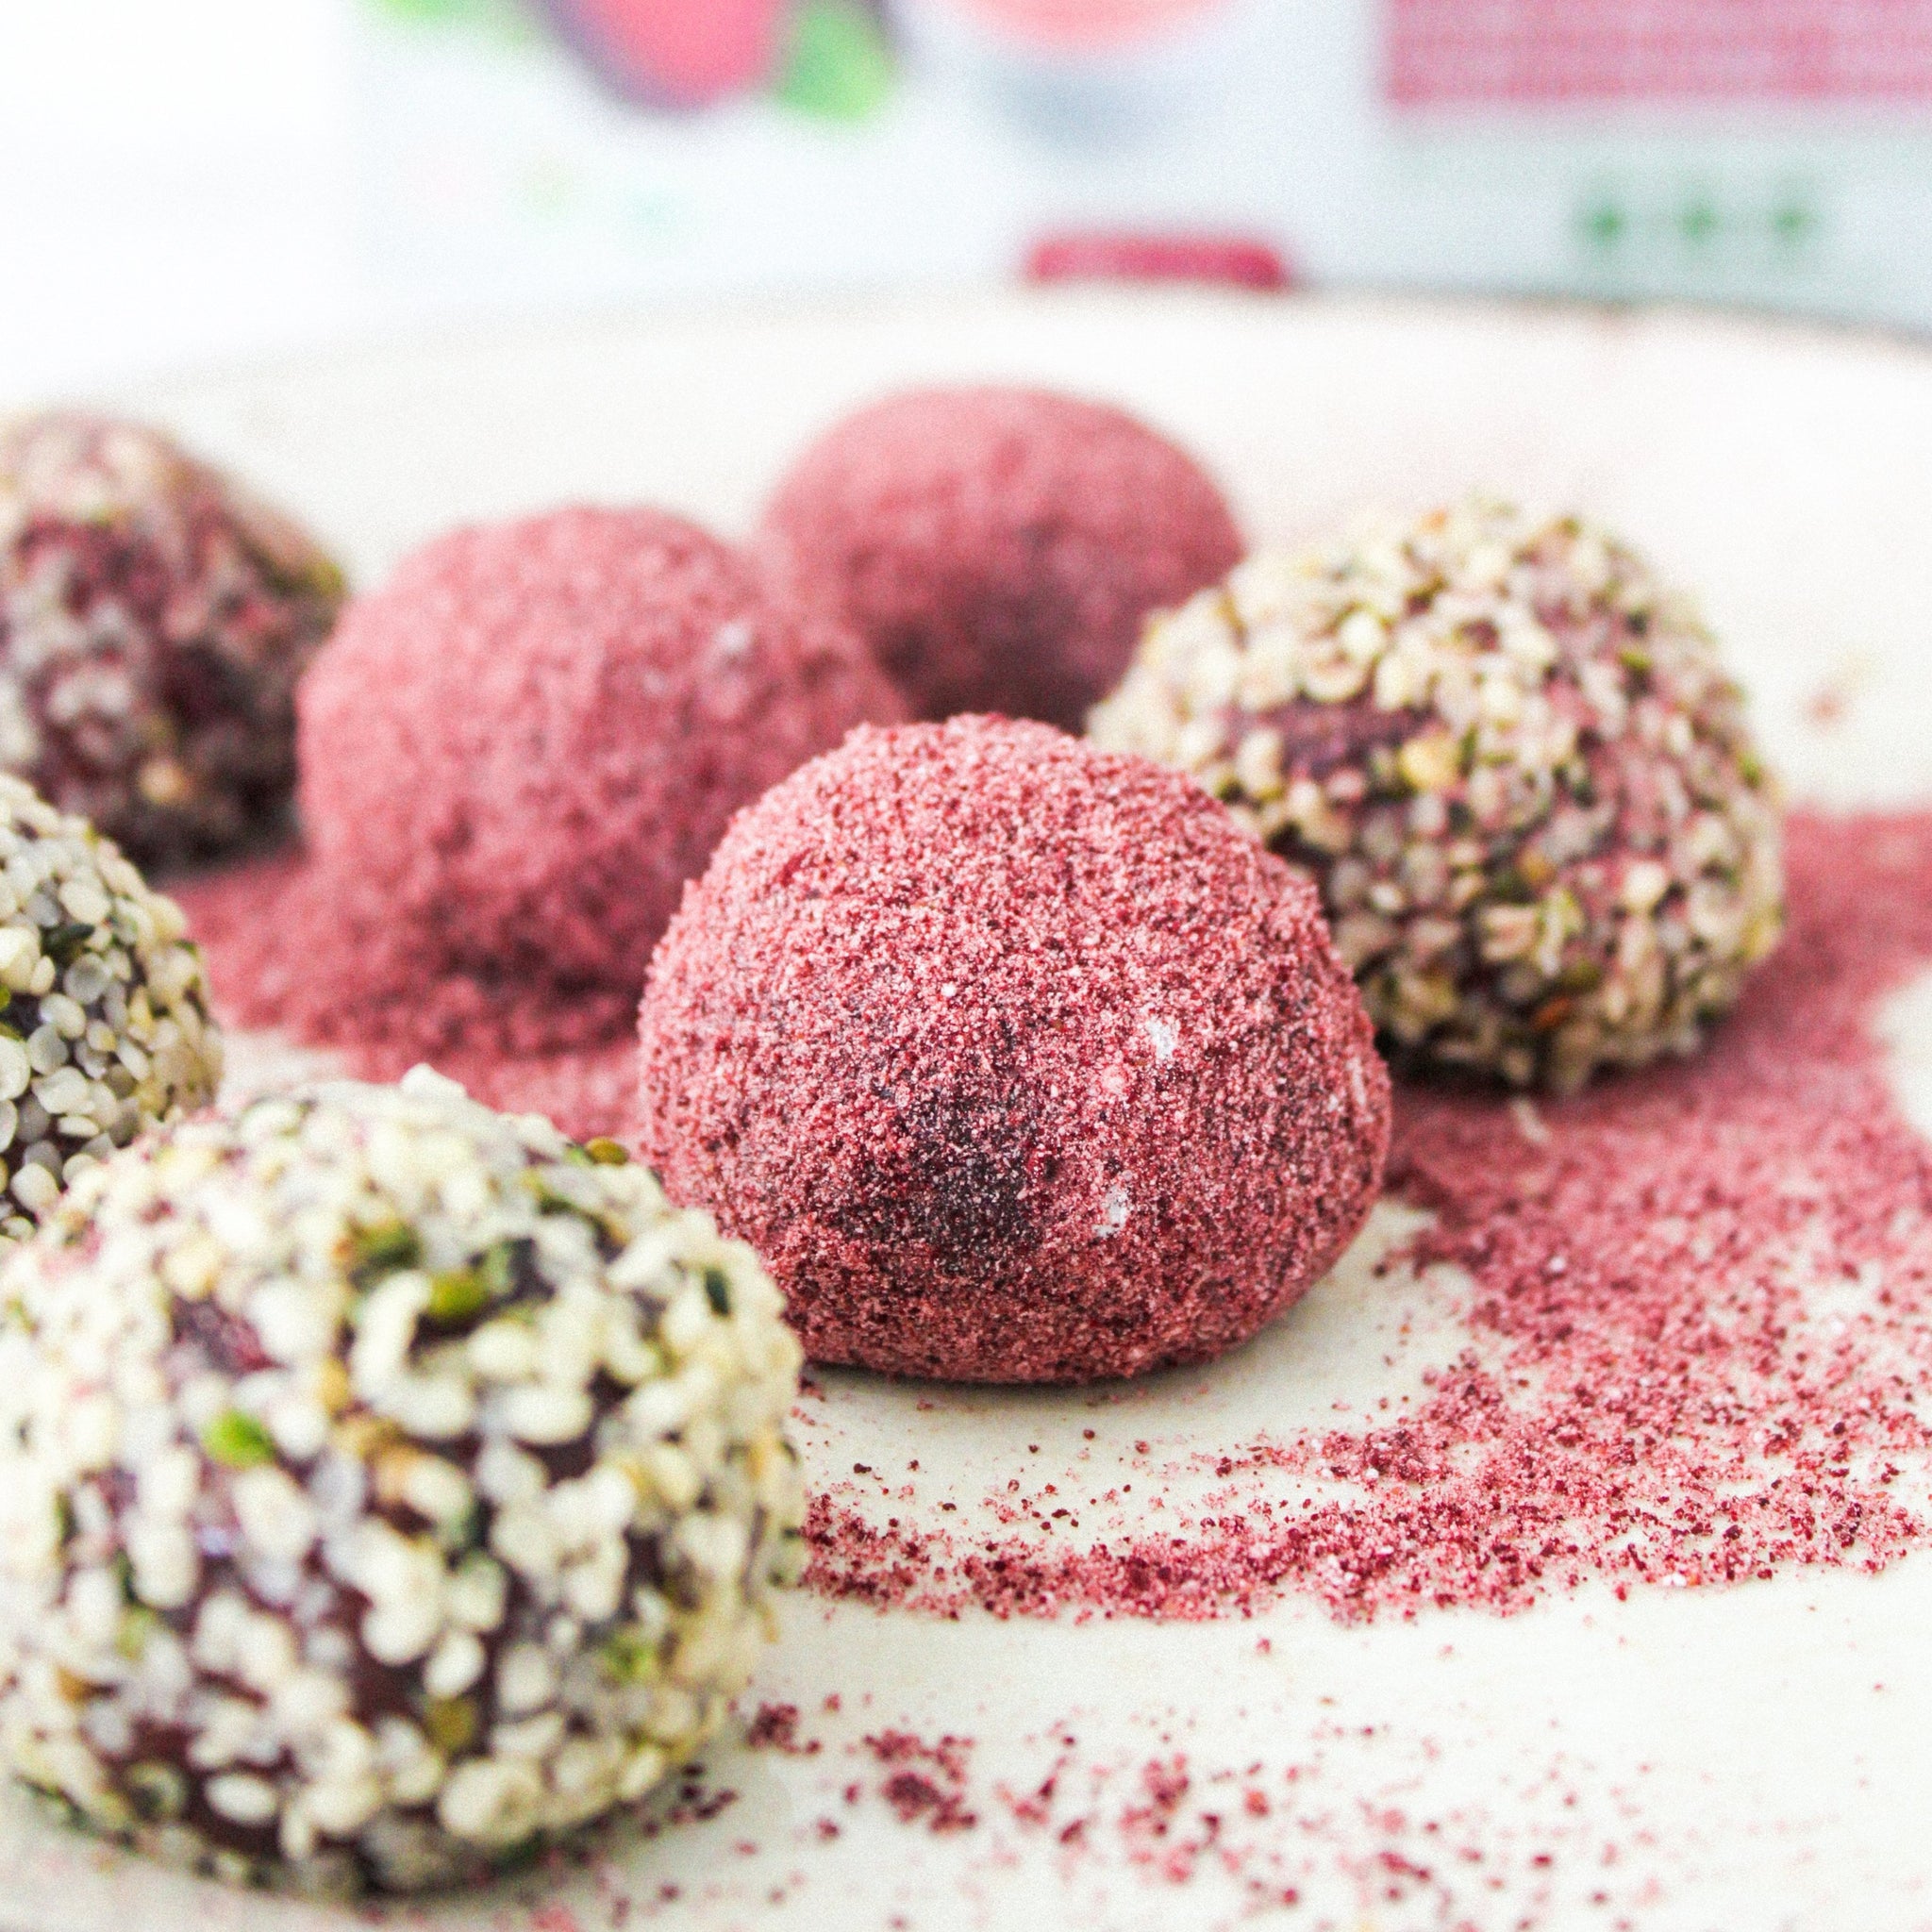 Beetroot and Dates Truffles